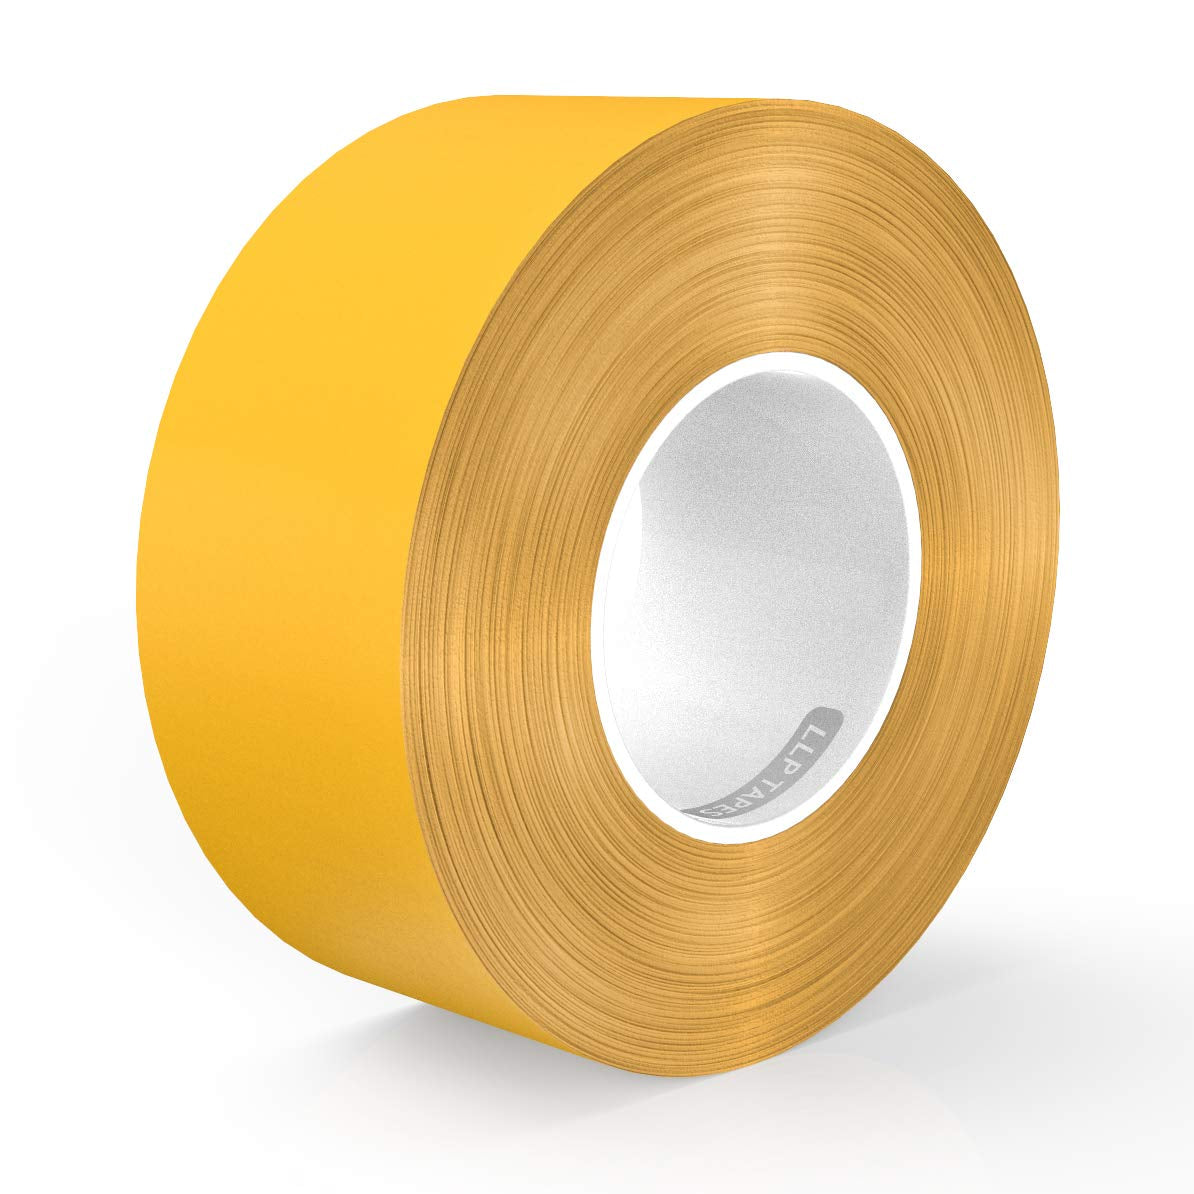 LLPT, LLPT Double Sided Tape for Woodworking Template and CNC Removable Residue Free 108 Feet Multiple Sizes (WT258)